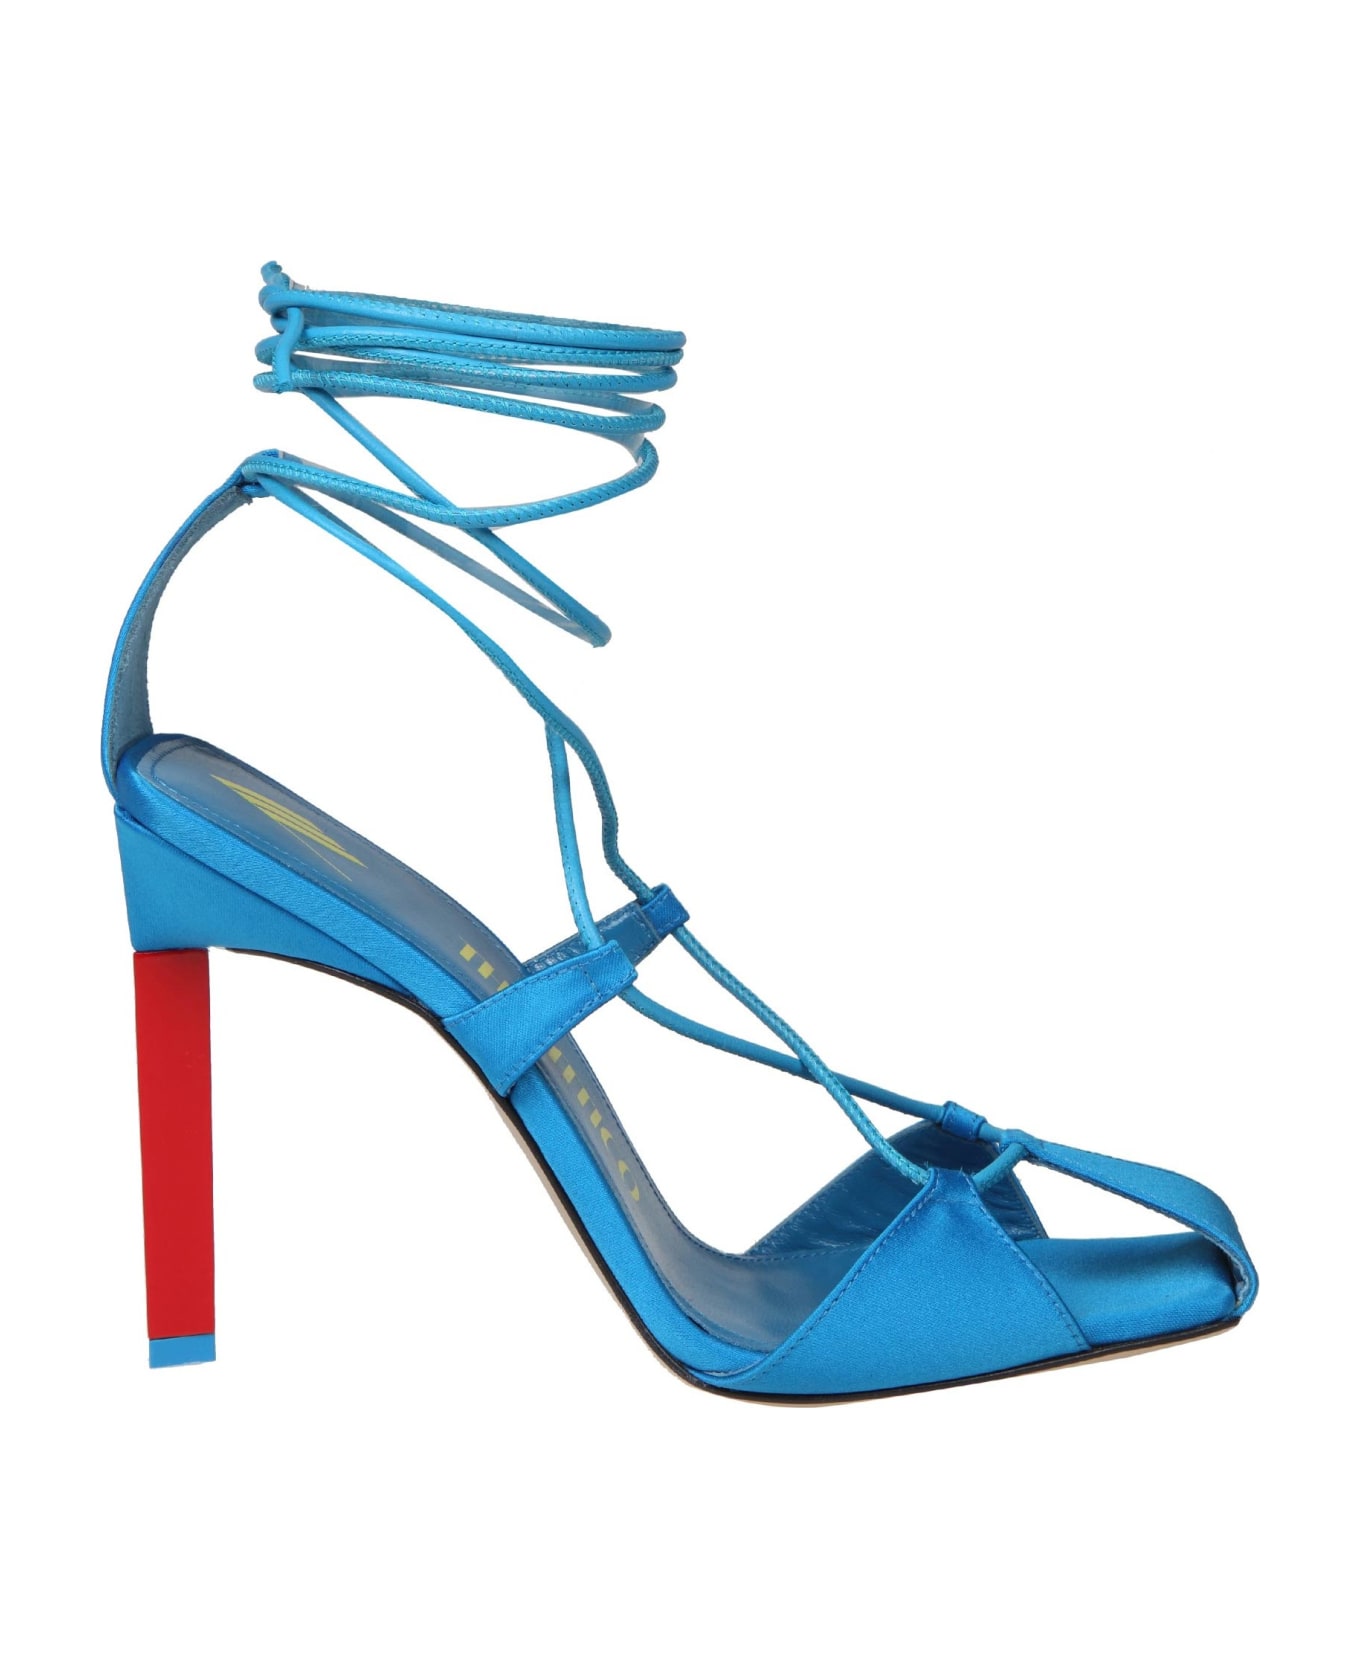 The Attico Adele Sandal In Turquoise Satin | italist, ALWAYS LIKE A SALE